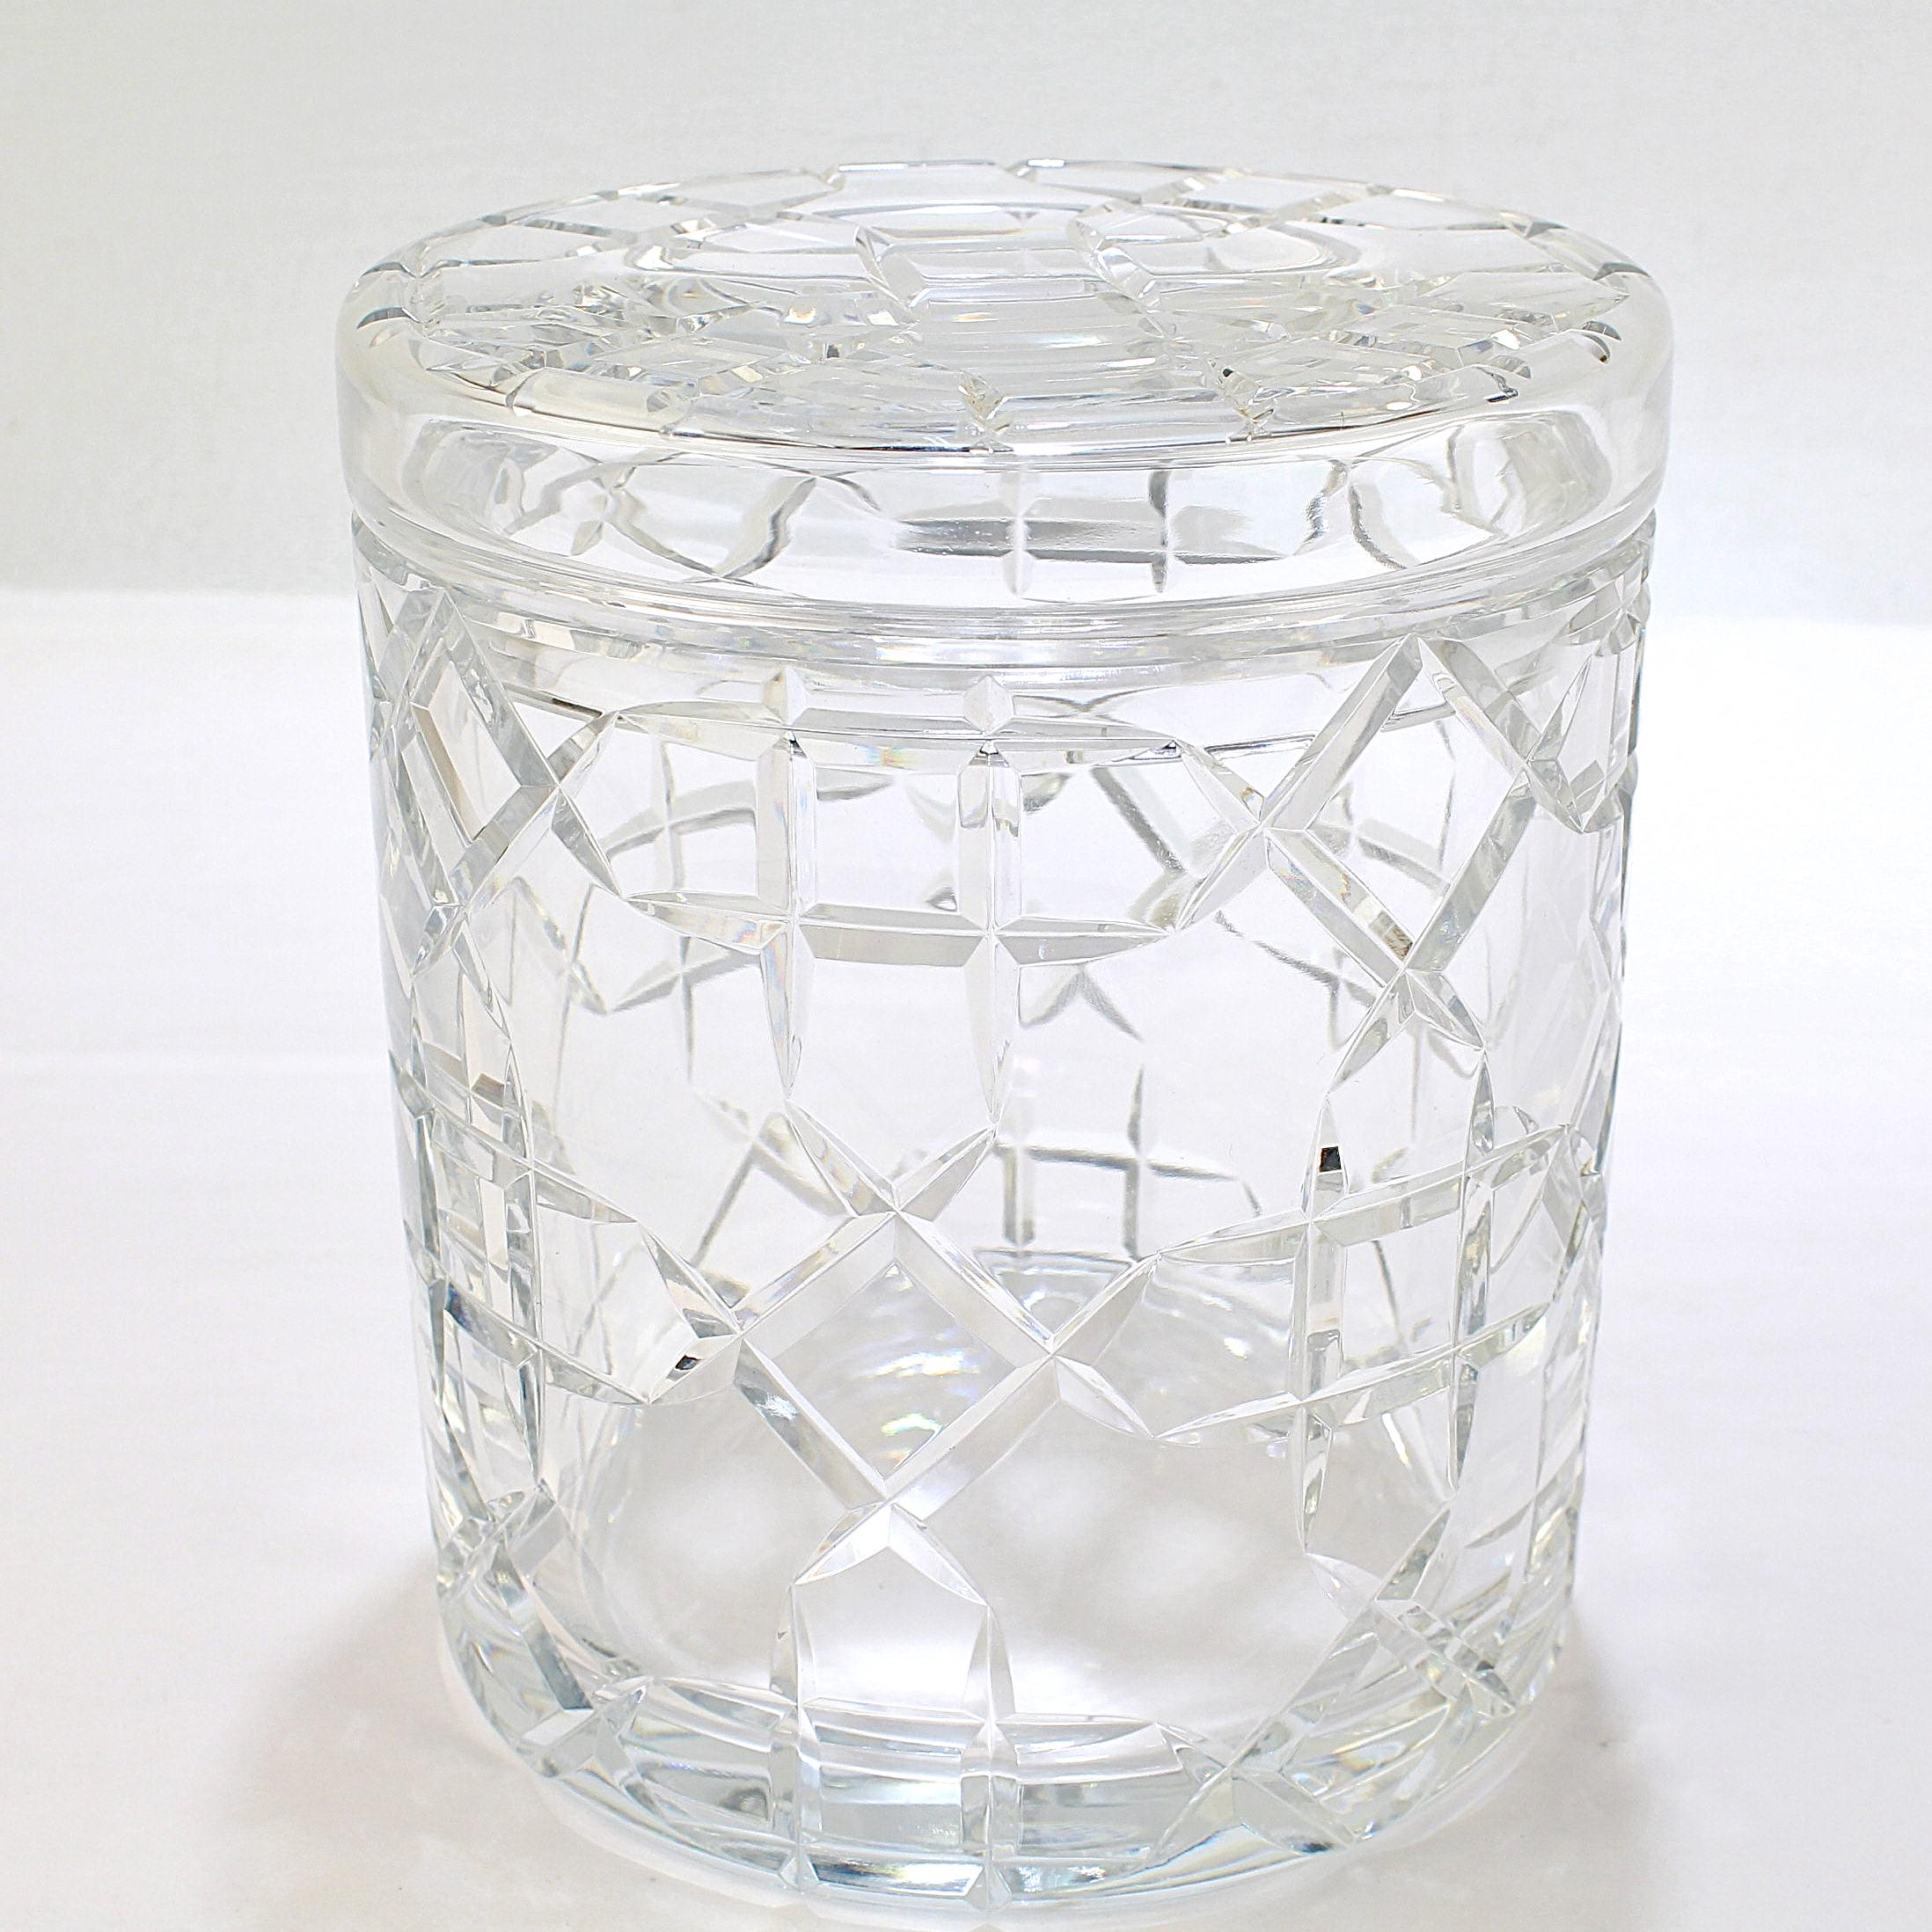 A fine cut glass biscuit barrel.

By Baccarat.

With a modern wheel-like decoration.

Simply a wonderful piece of Baccarat glass!

Date:
20th Century

Overall Condition:
It is in overall good, as-pictured, used estate condition with some